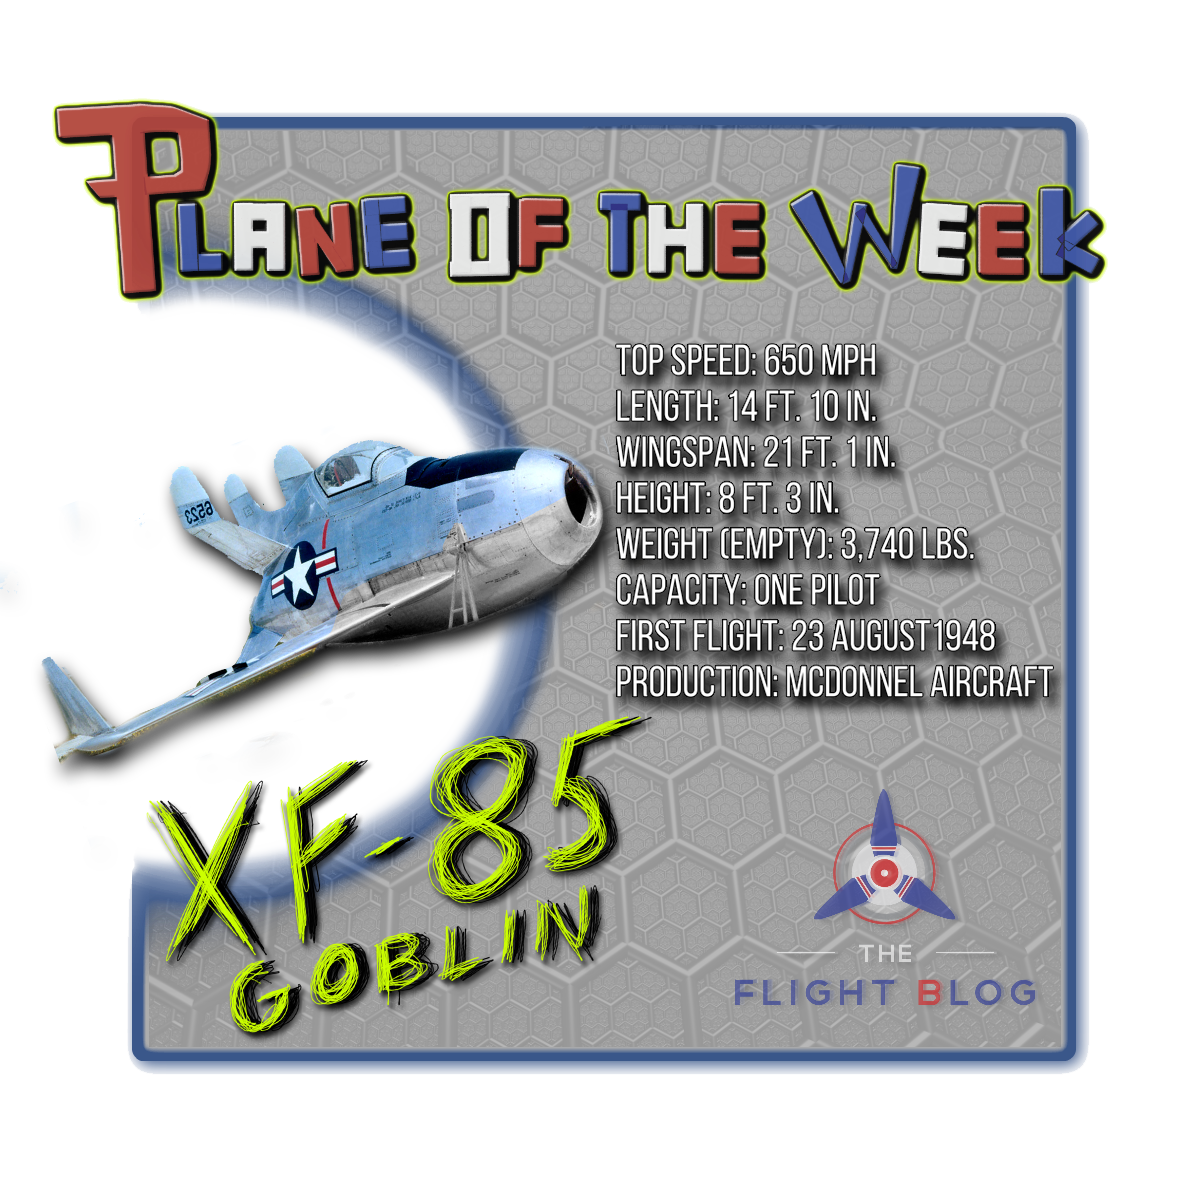 McDonnell XF-85 Goblin Specification Table